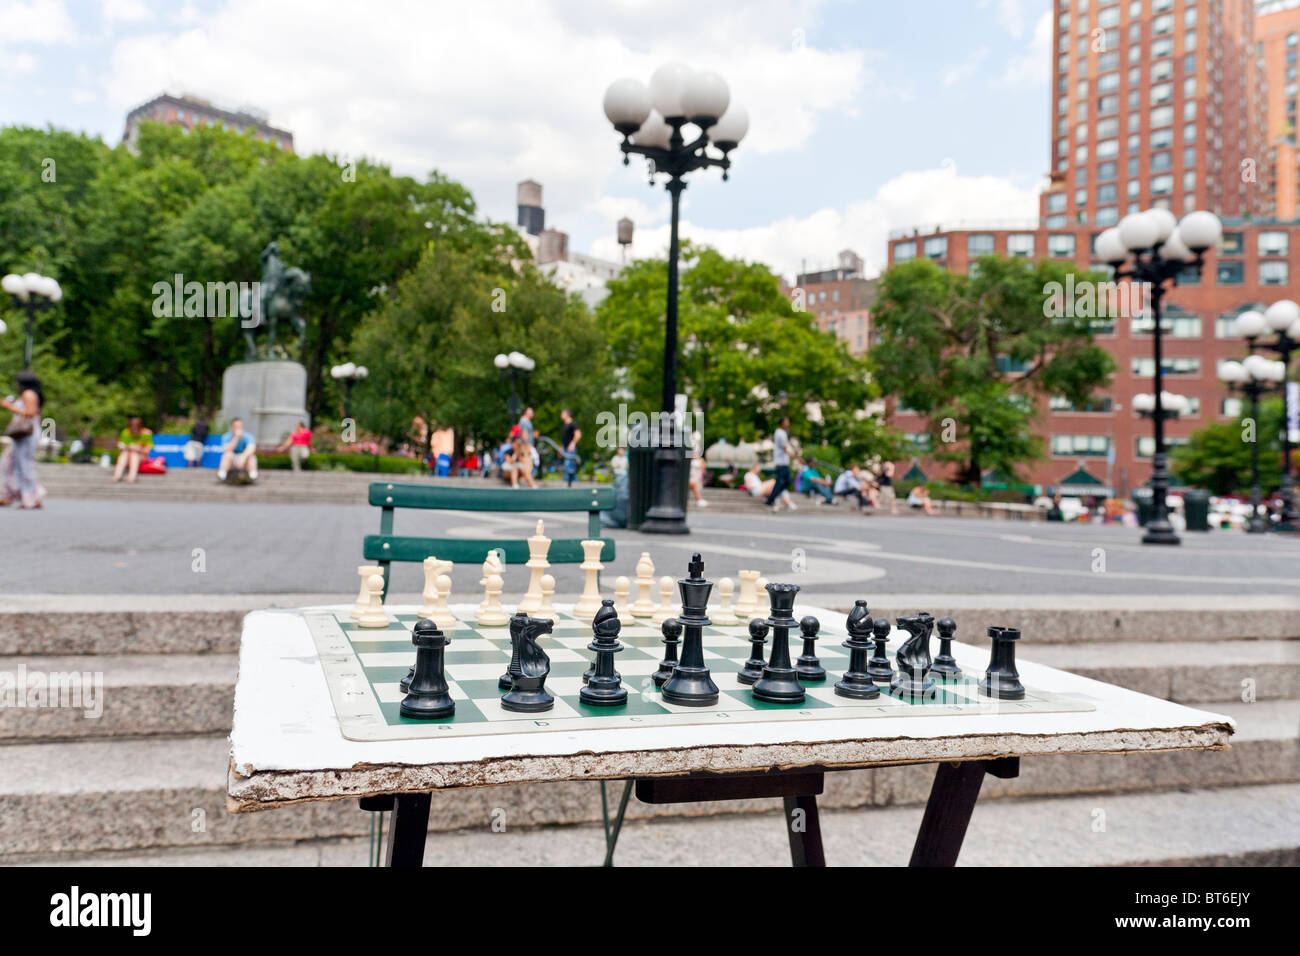 Playing Chess in Union Square Park, New York City. Stock Photo